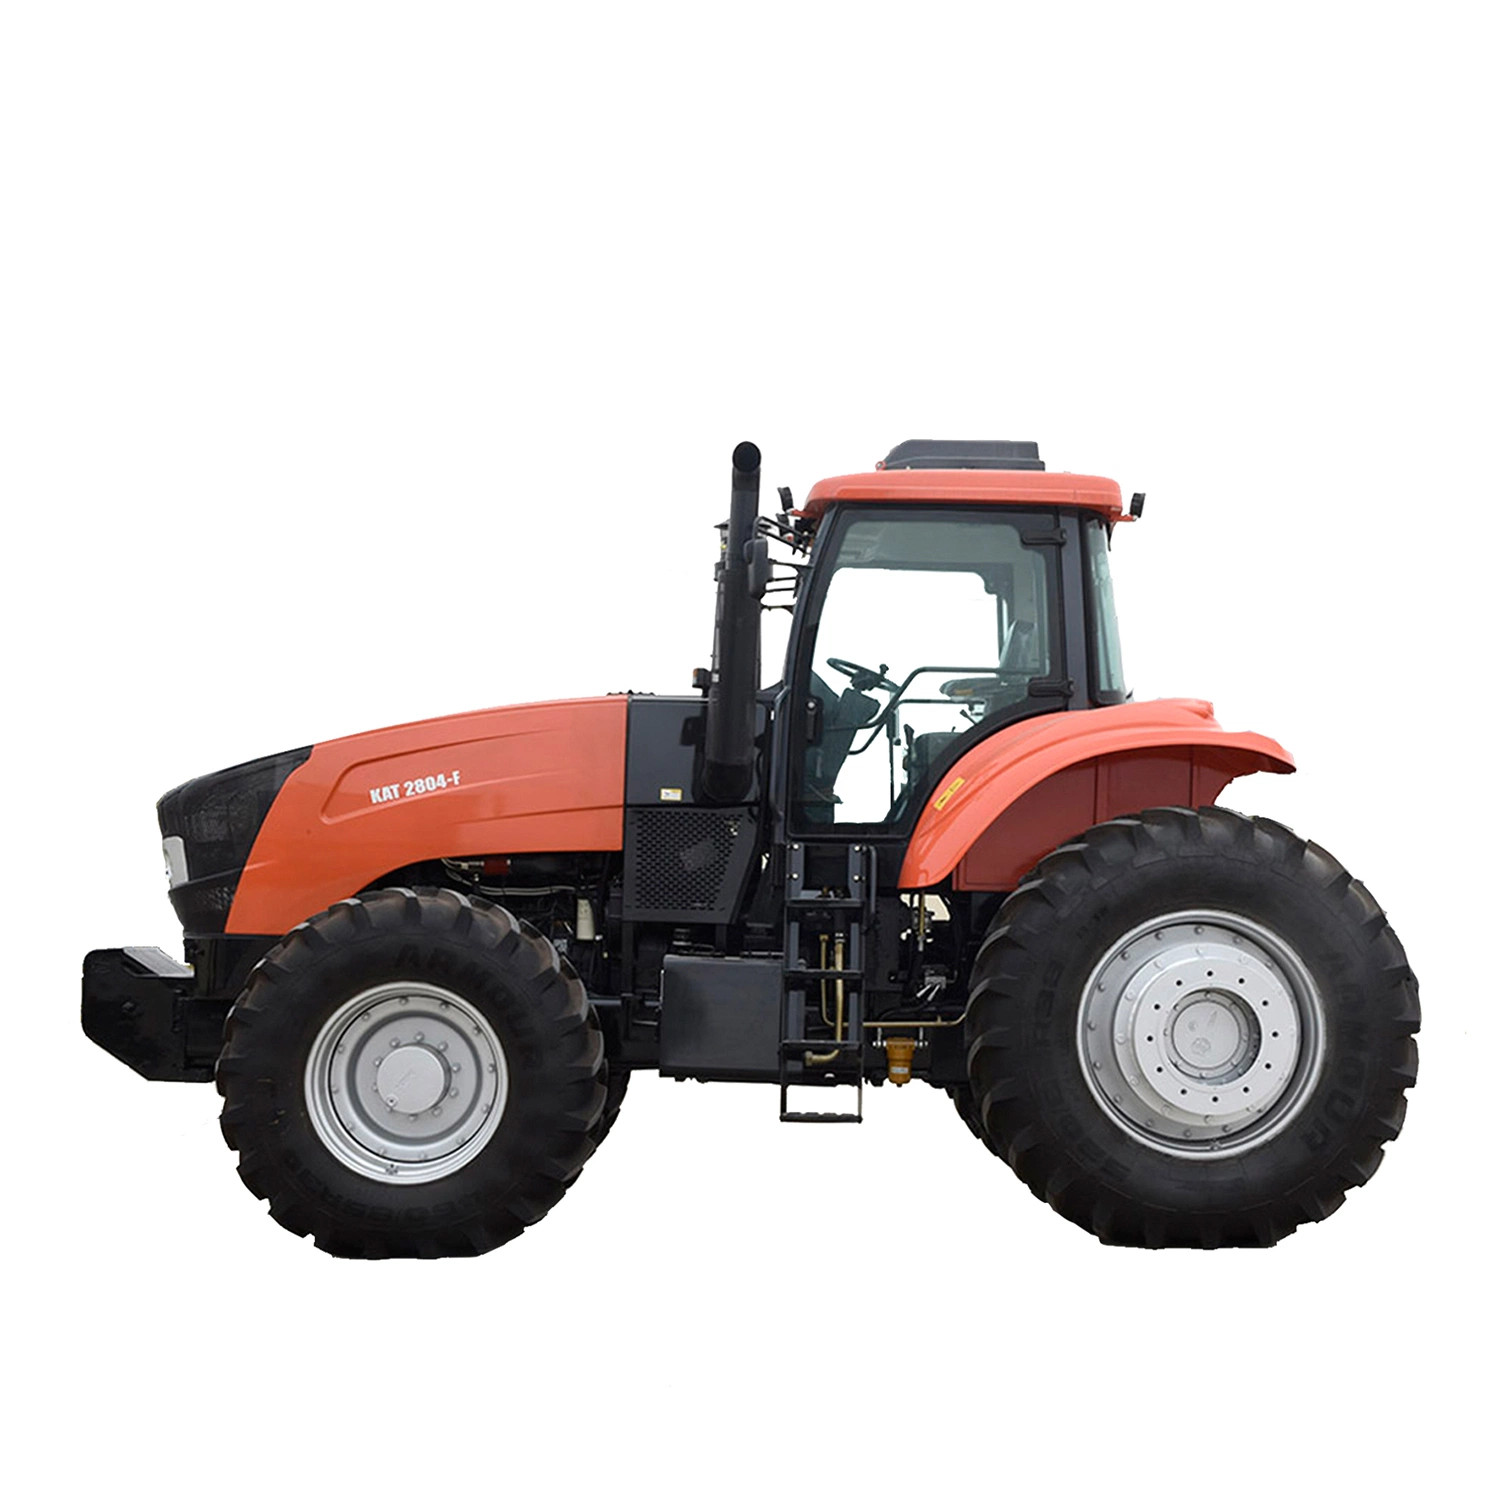 Kat2804-F Tractor China Agricultural Machinery 280HP Agriculture Farm Machinery